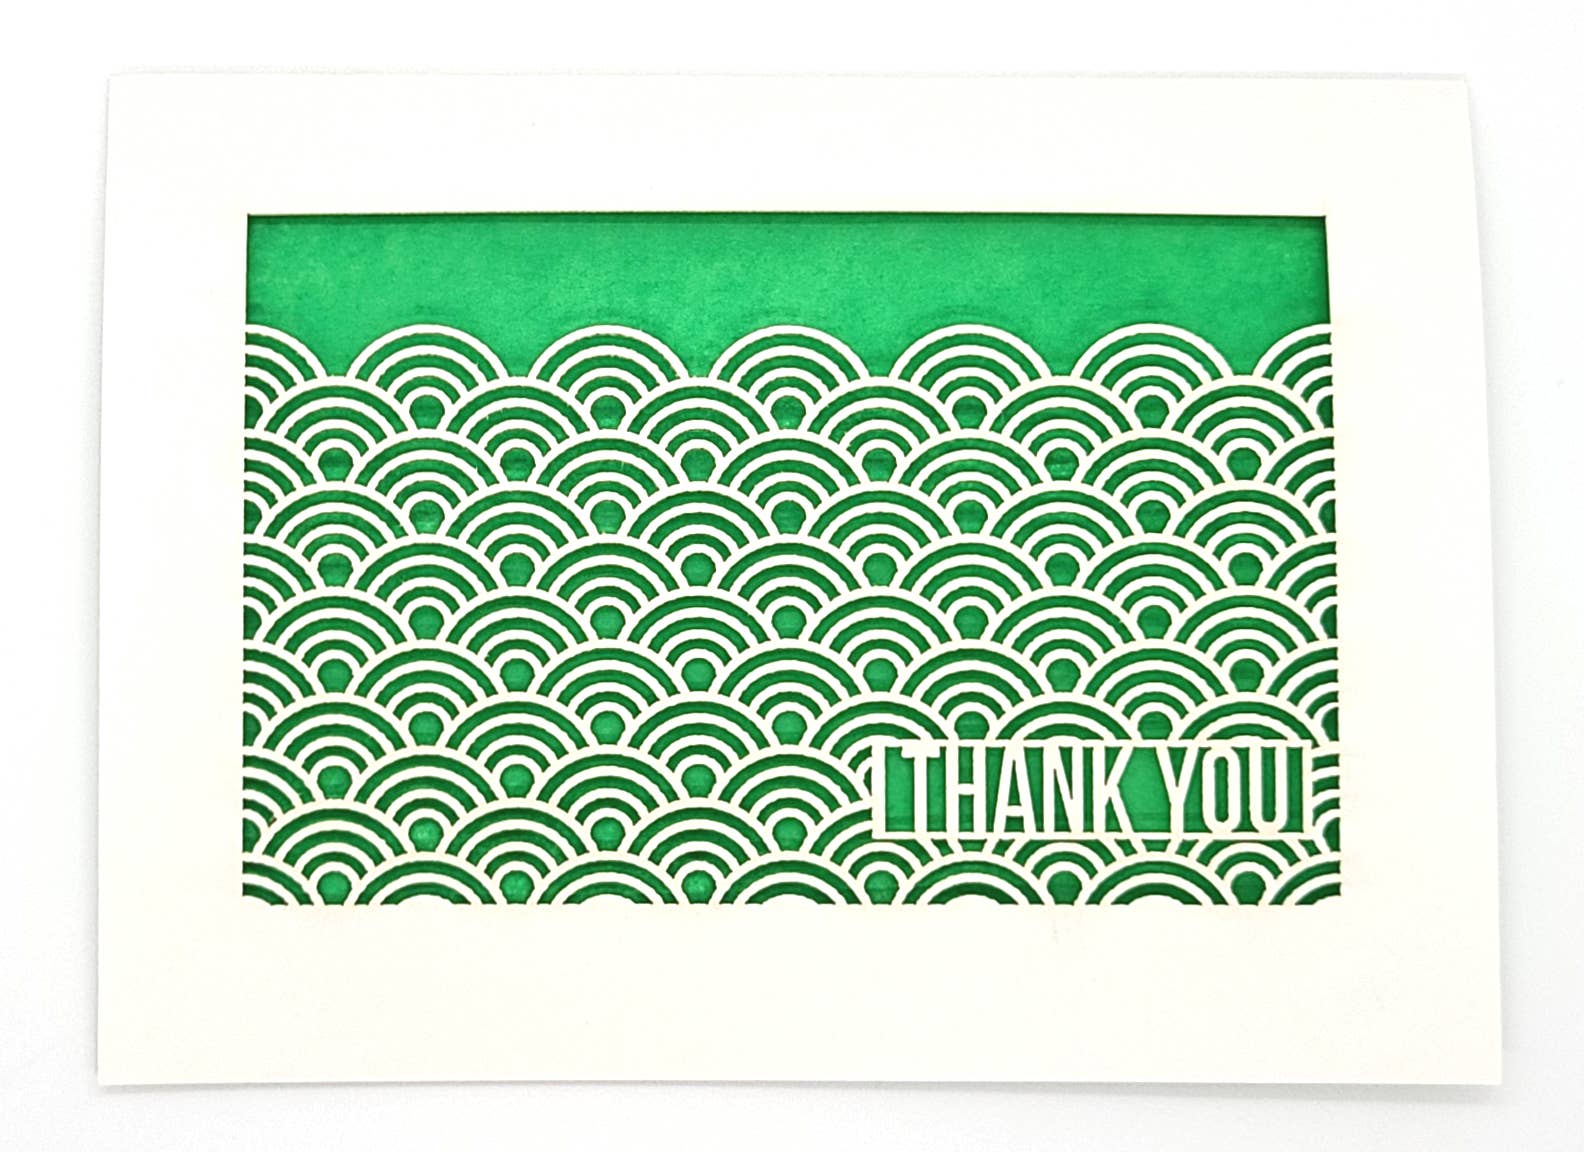 Thank You Greeting card with laser cut design of waves on green background